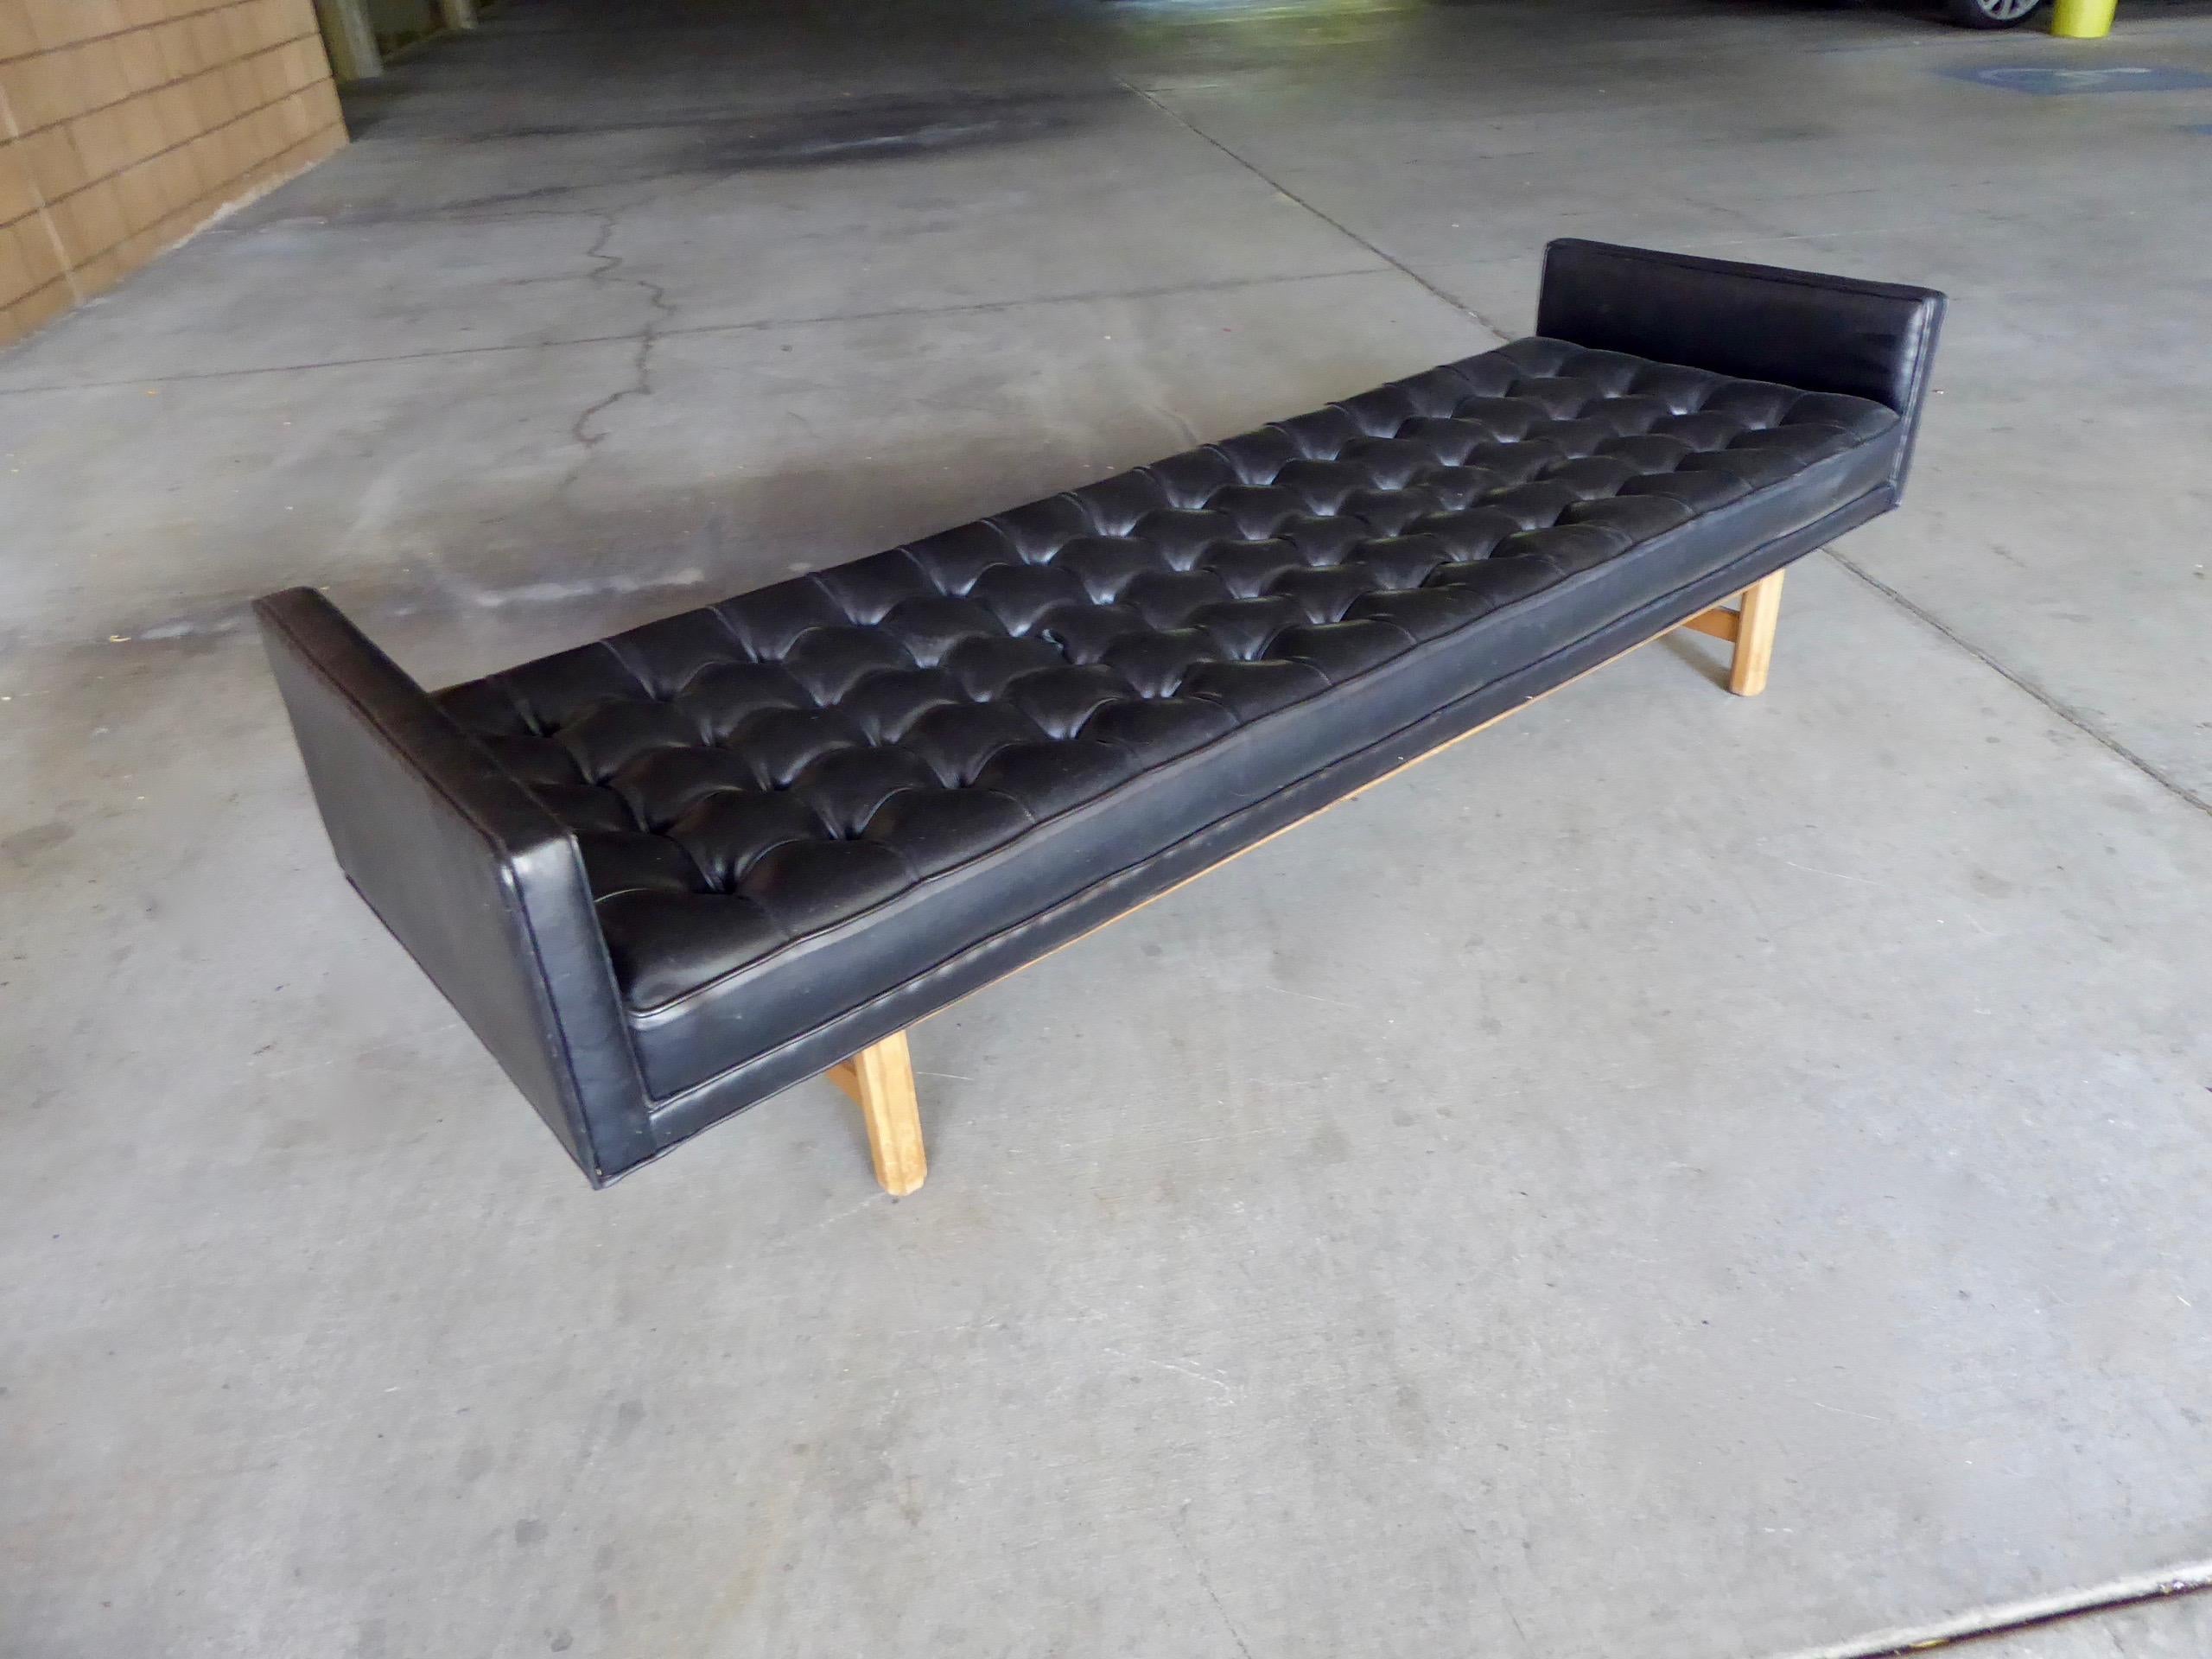 A long and sexy tufted black leather bench or daybed attributed to The Dunbar Furniture Co., circa 1960s. The base is made of mahogany and is discreetly setback from the edges. The leather is original and is in excellent vintage condition. This